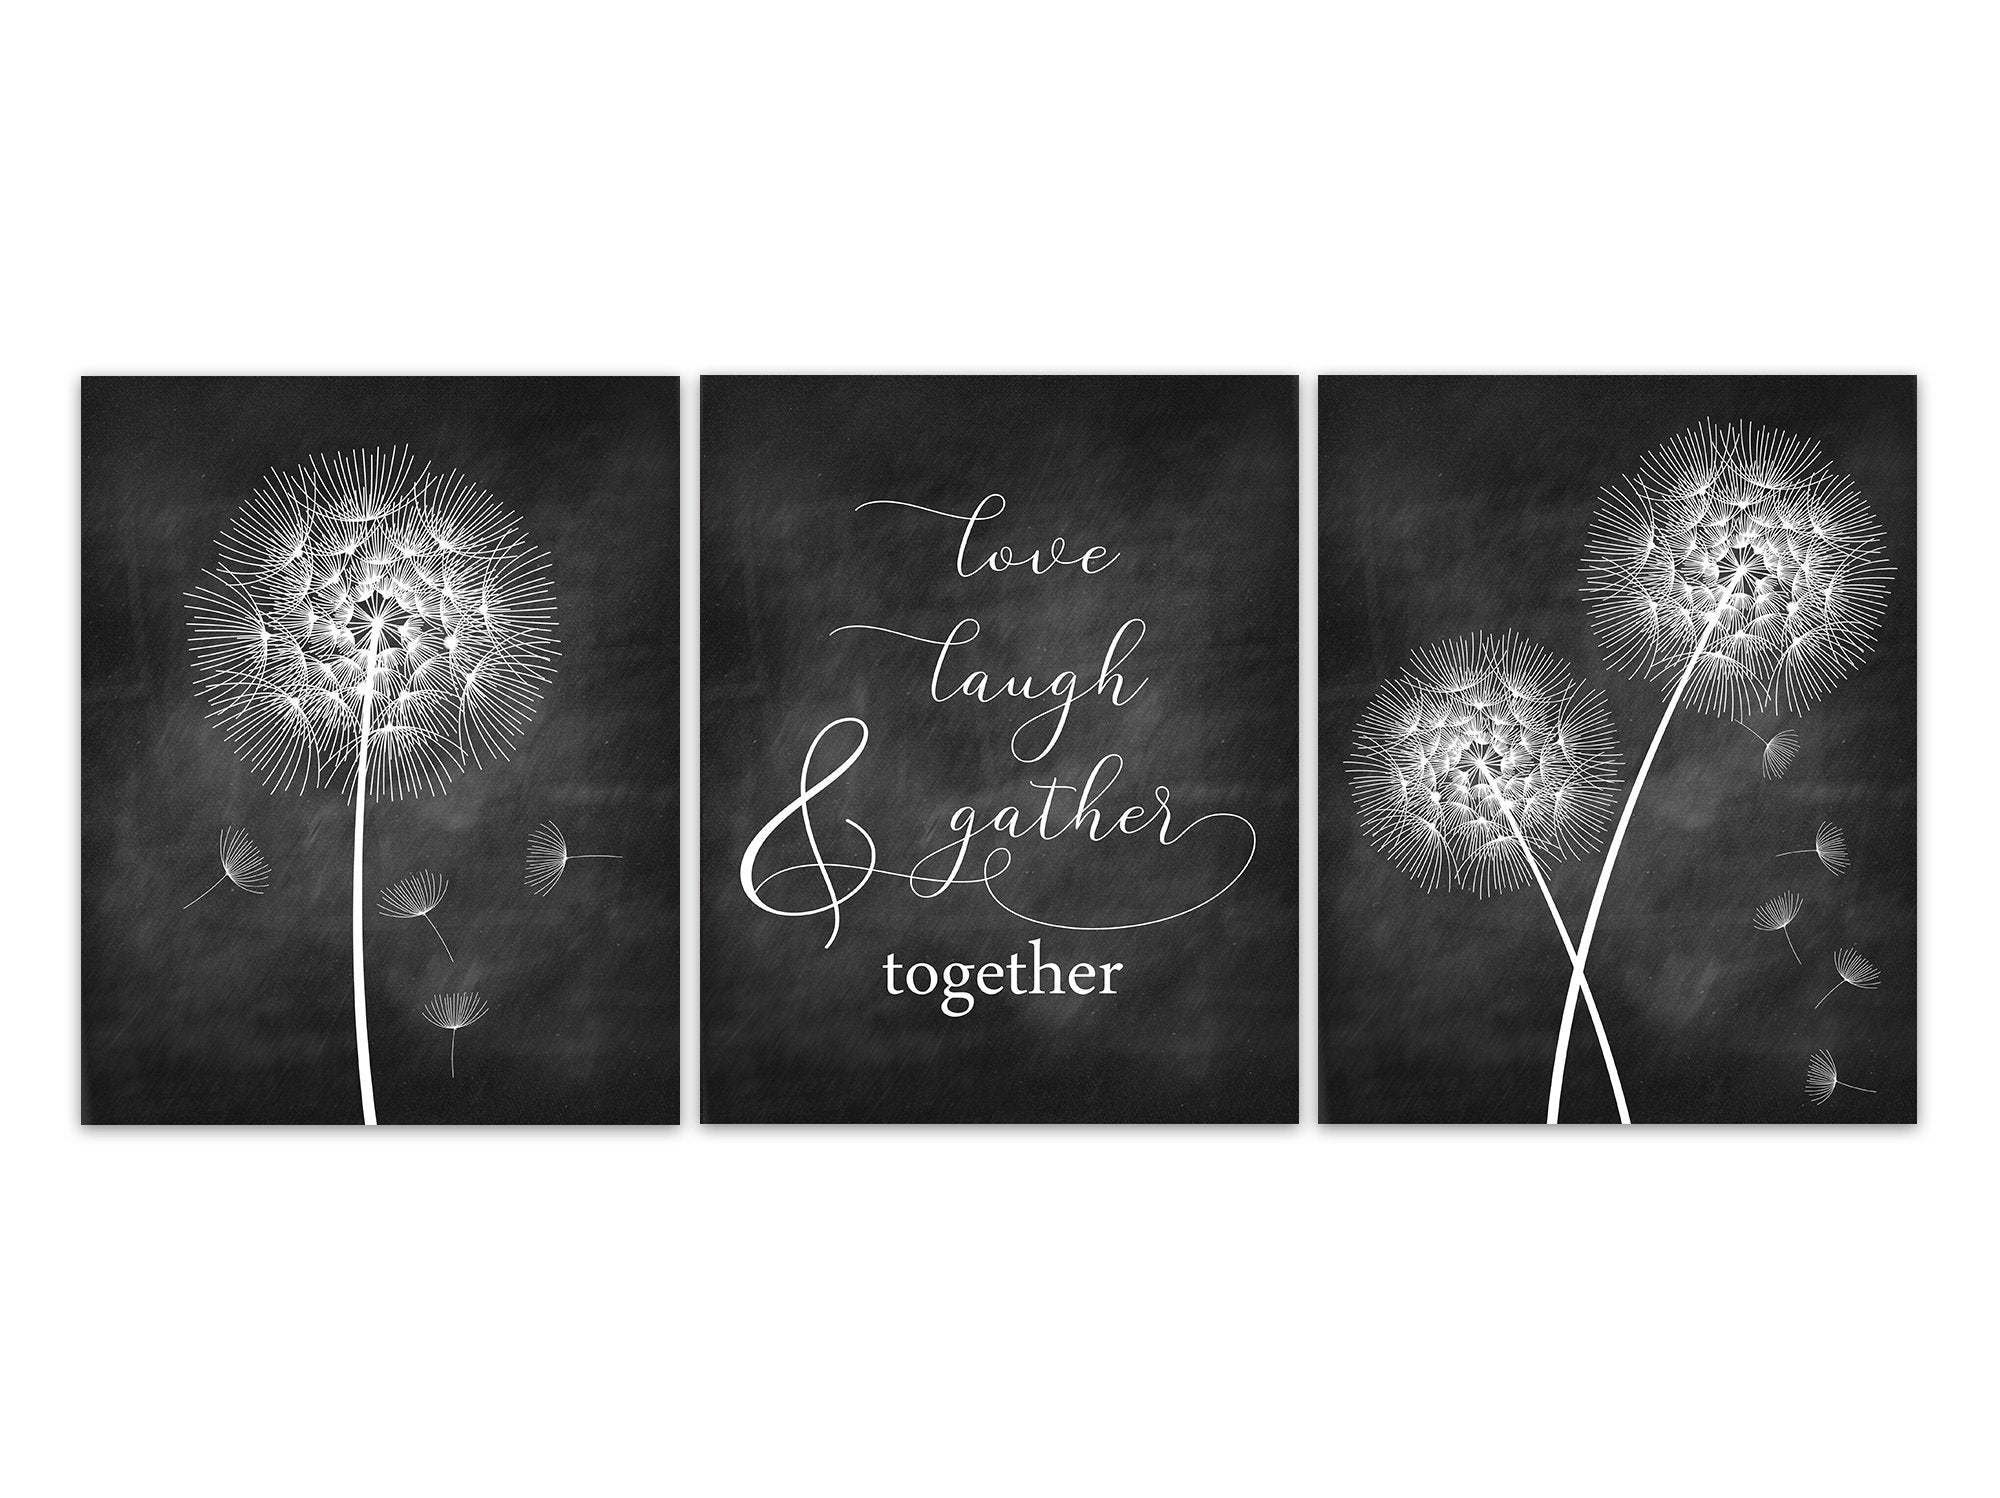 Love Laugh Gather Together Wall Art, Black Kitchen Wall Art, Home Decor CANVAS or PRINTS, Dandelion Flower Dining Room Wall Decor - HOME570